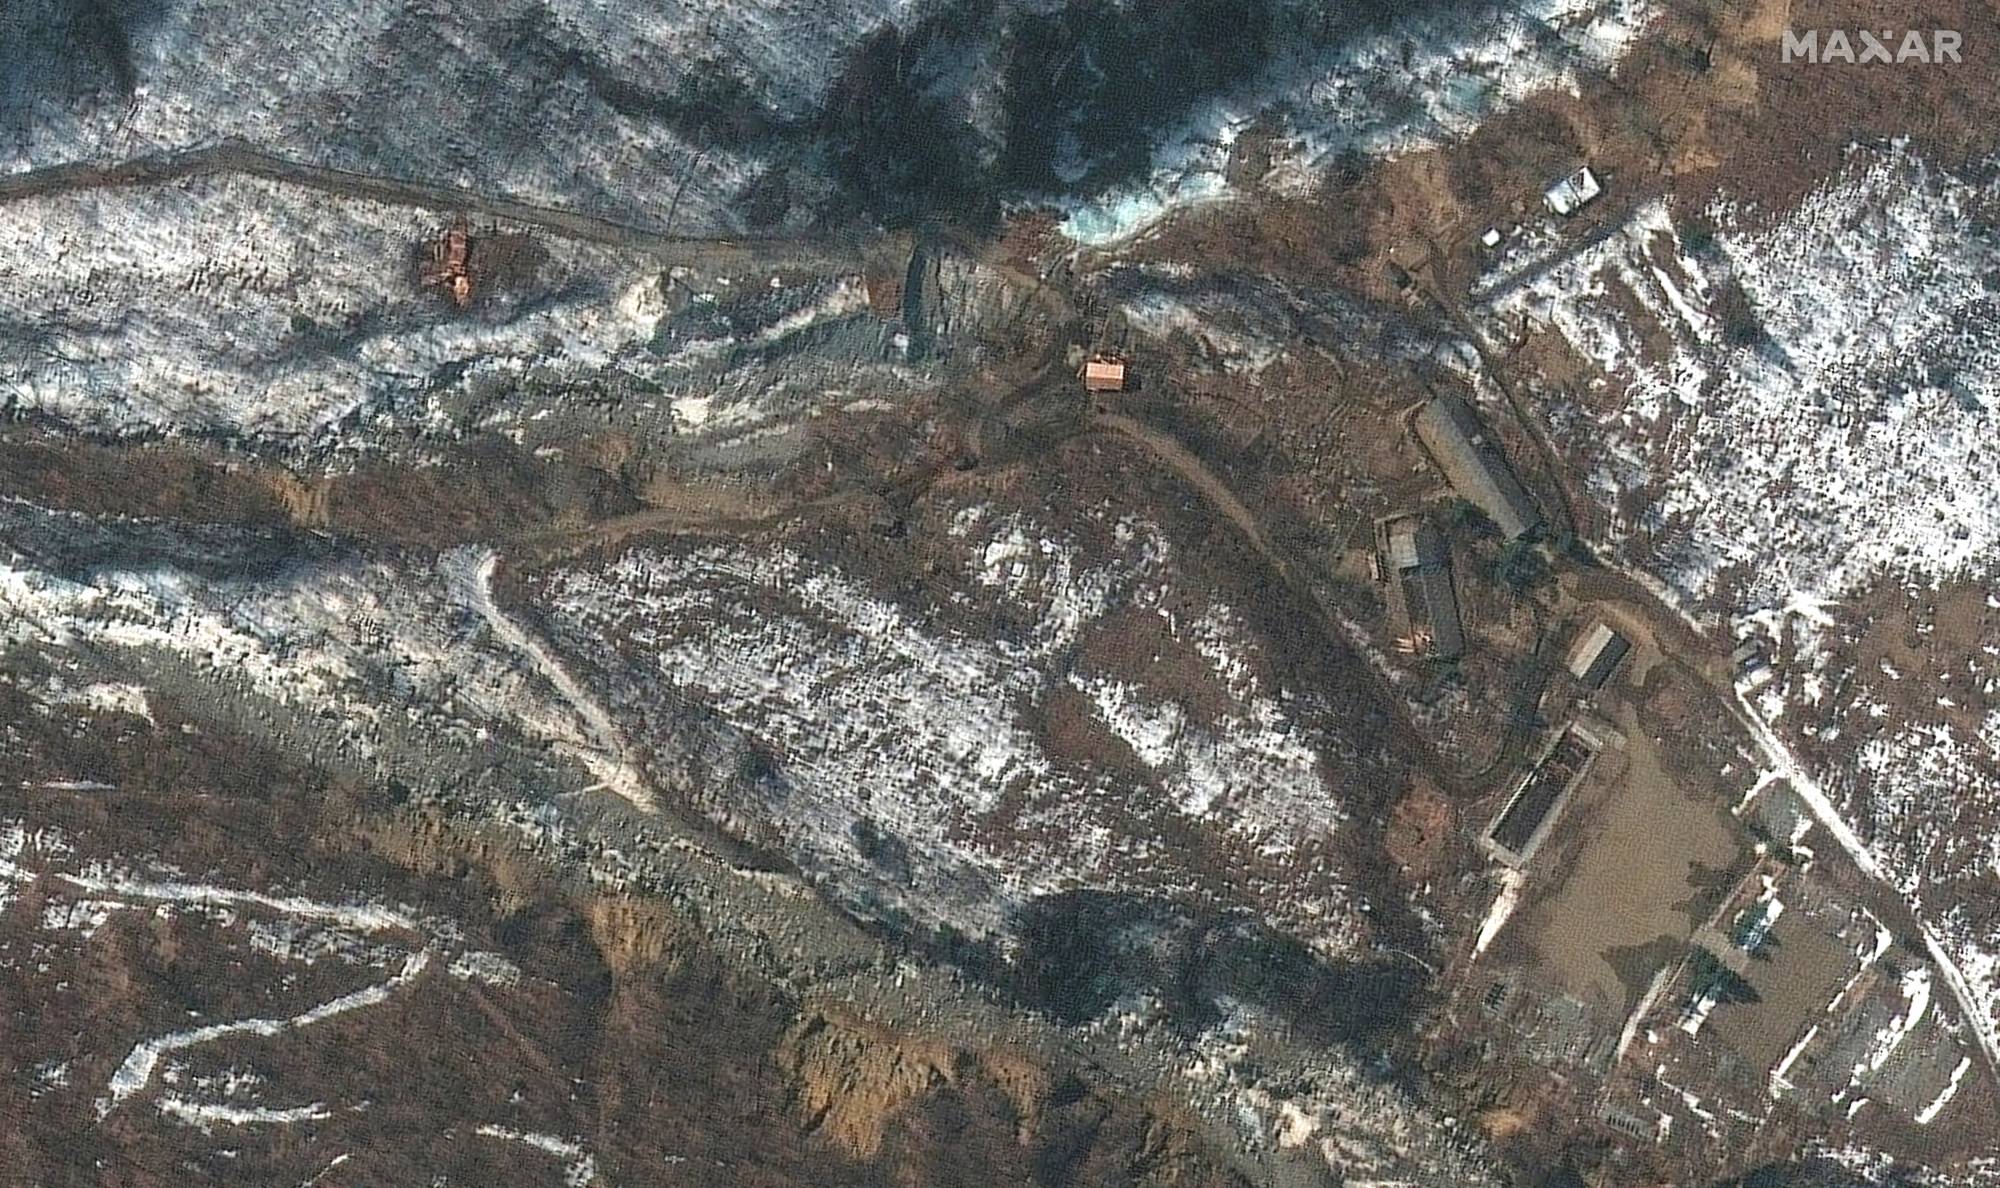 A satellite image shows an overview of new activity at the Punggye-ri nuclear test site in North Korea's North Hamgyong province on March 4. A report says the North could be preparing a 'shortcut' that would allow it to quickly conduct its seventh nuclear test. | ©2022 MAXAR TECHNOLOGIES / VIA REUTERS 